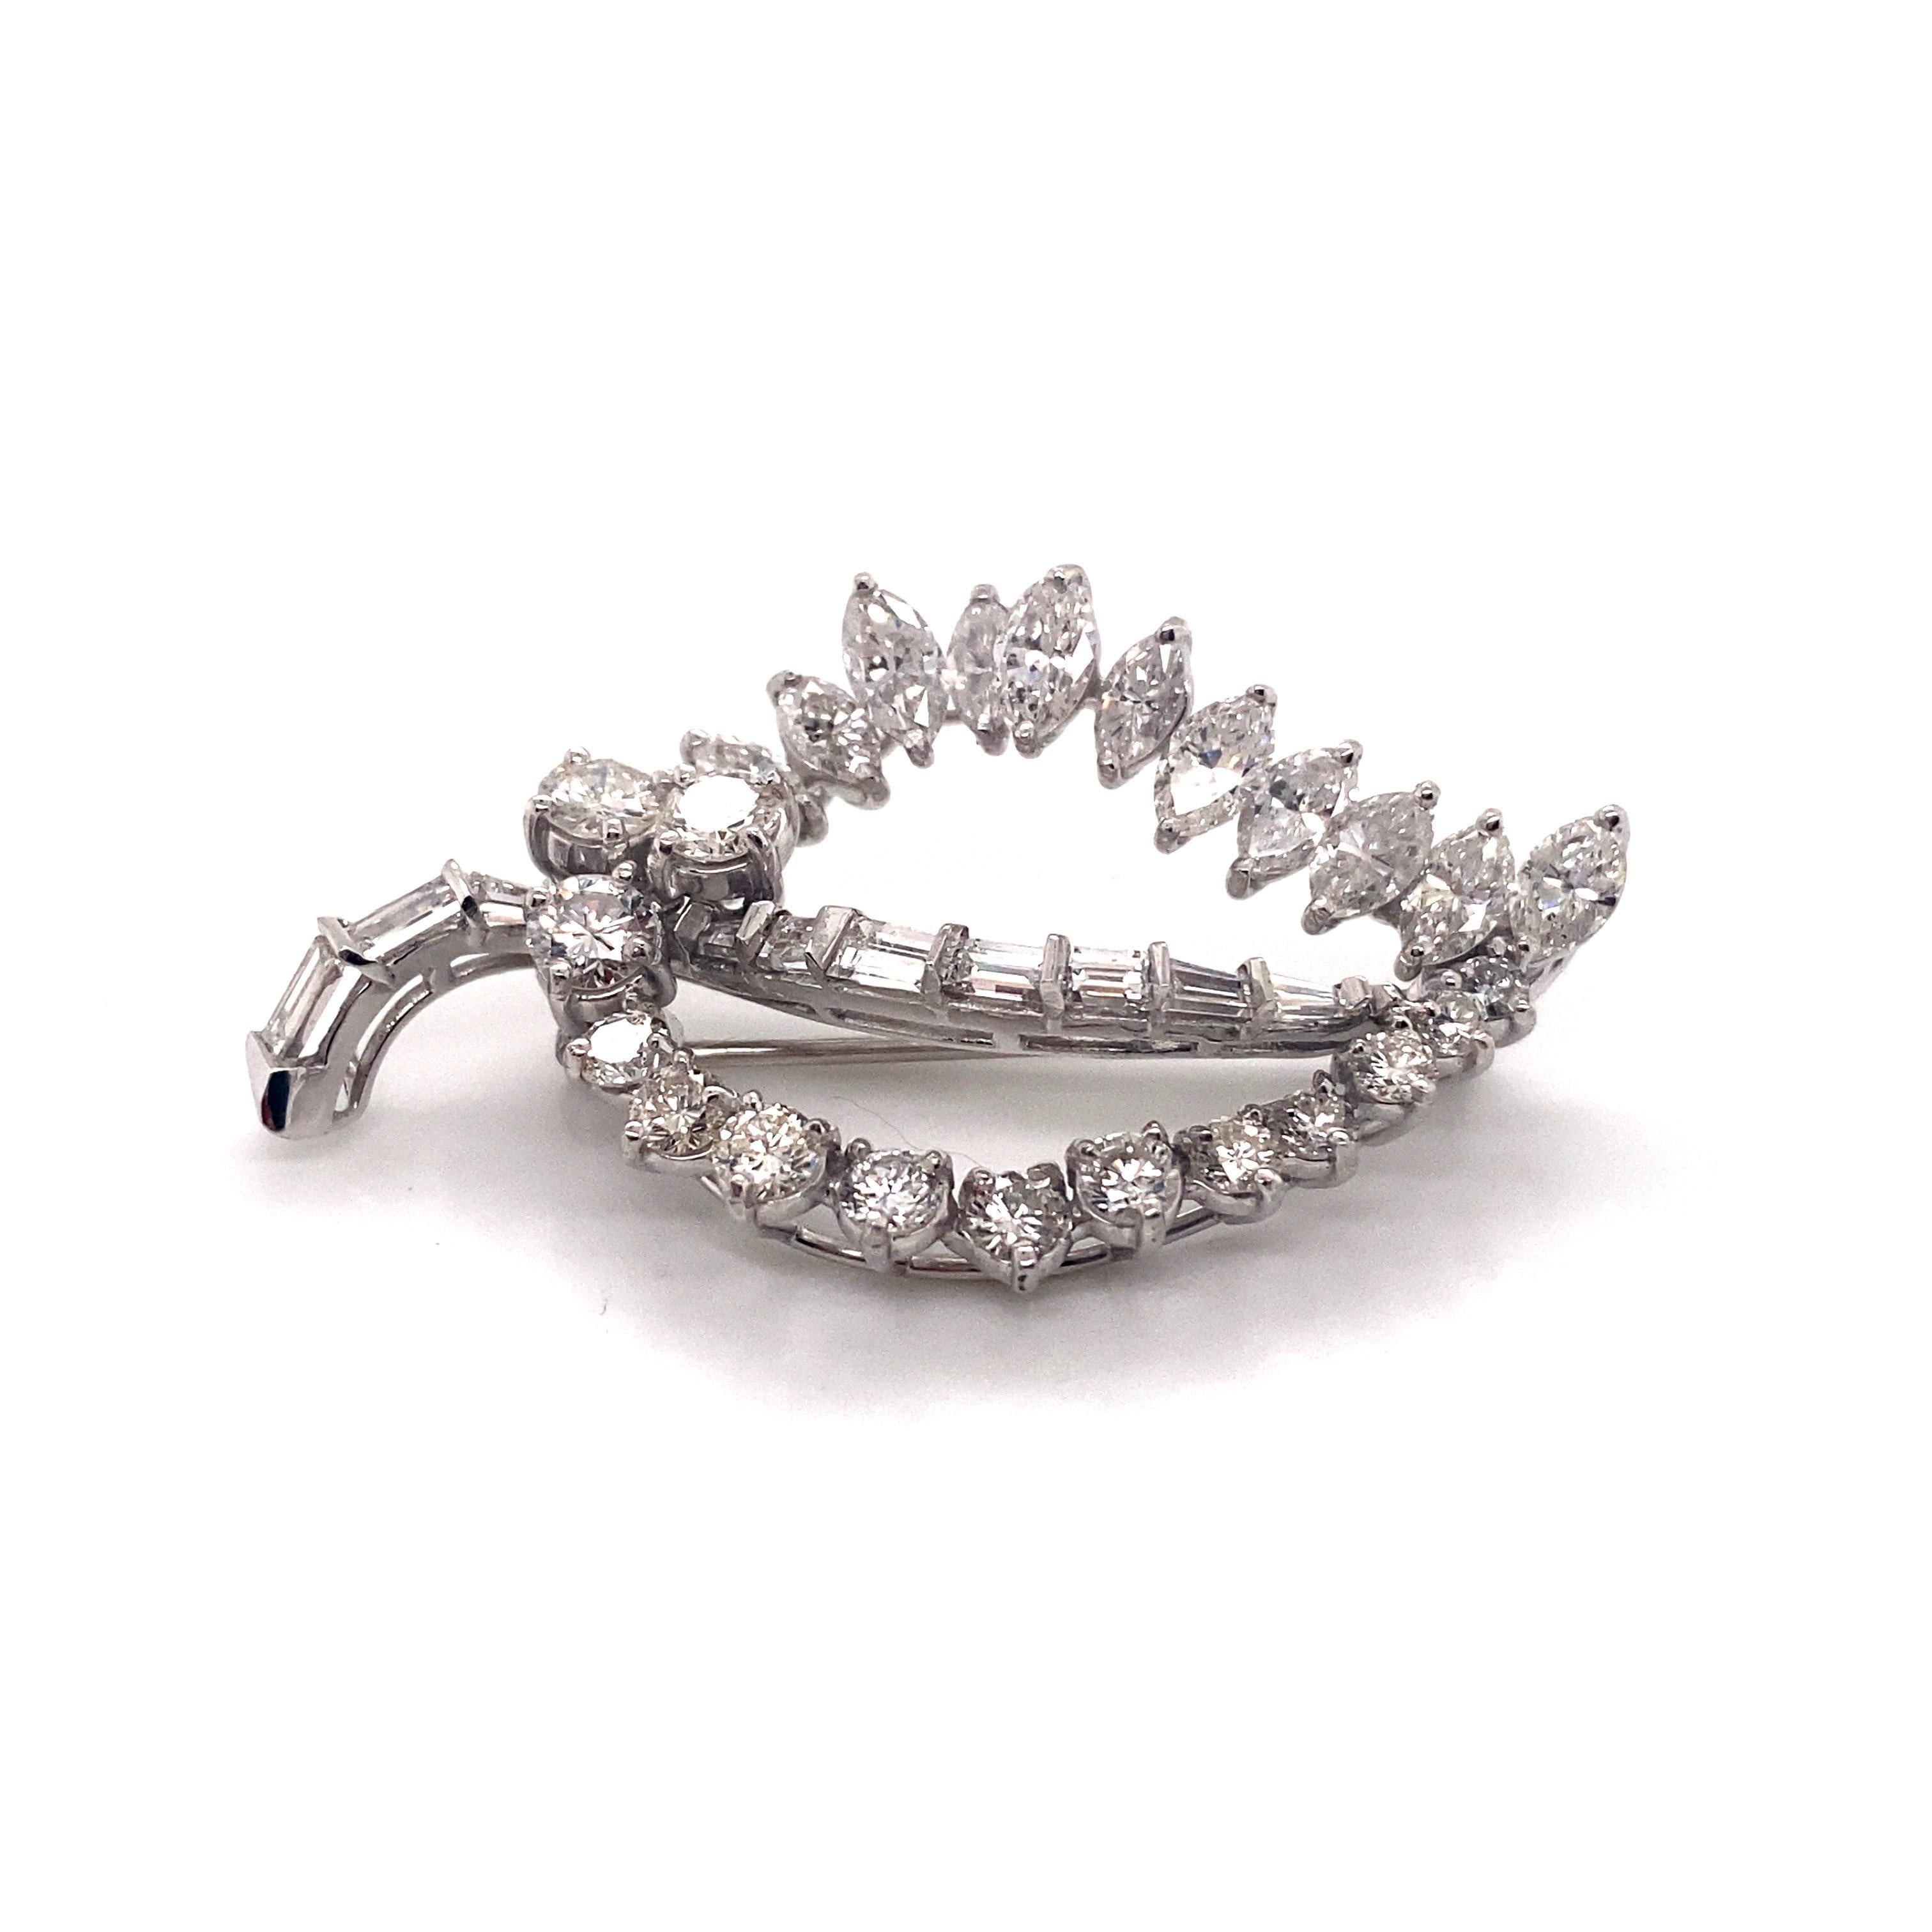 Vintage 1960’s Platinum Marquise Round and Baguette Diamond Leaf Pin - The pin contains 11 marquise diamonds that weigh approximately 2.00ct total weight. There 14 round brilliant diamonds that weigh approximately 1.80ct total weight. And 10